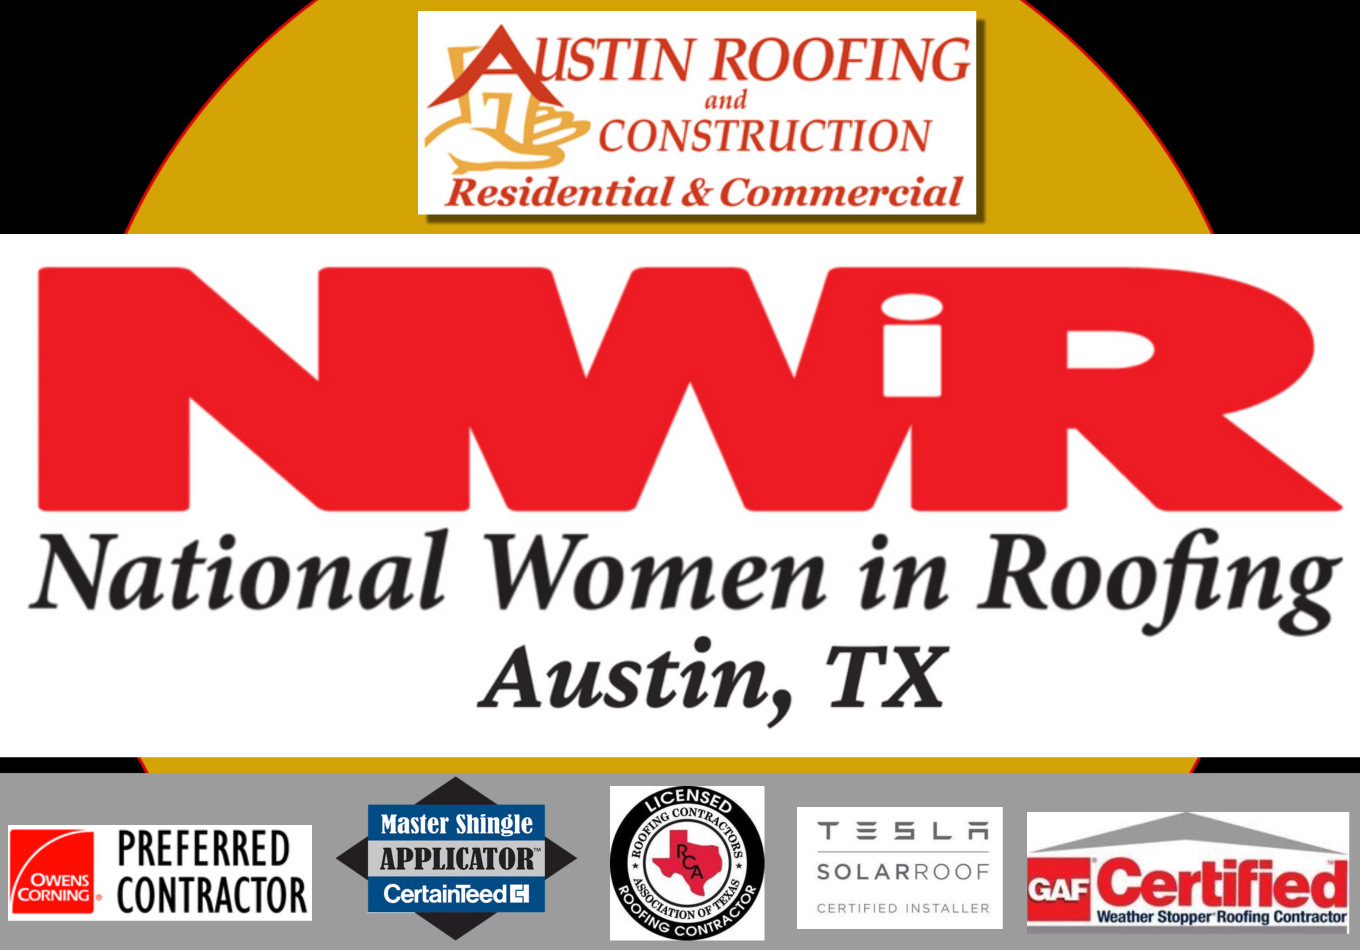 Austin Roofing and Construction, Thursday, July 22, 2021, Press release picture